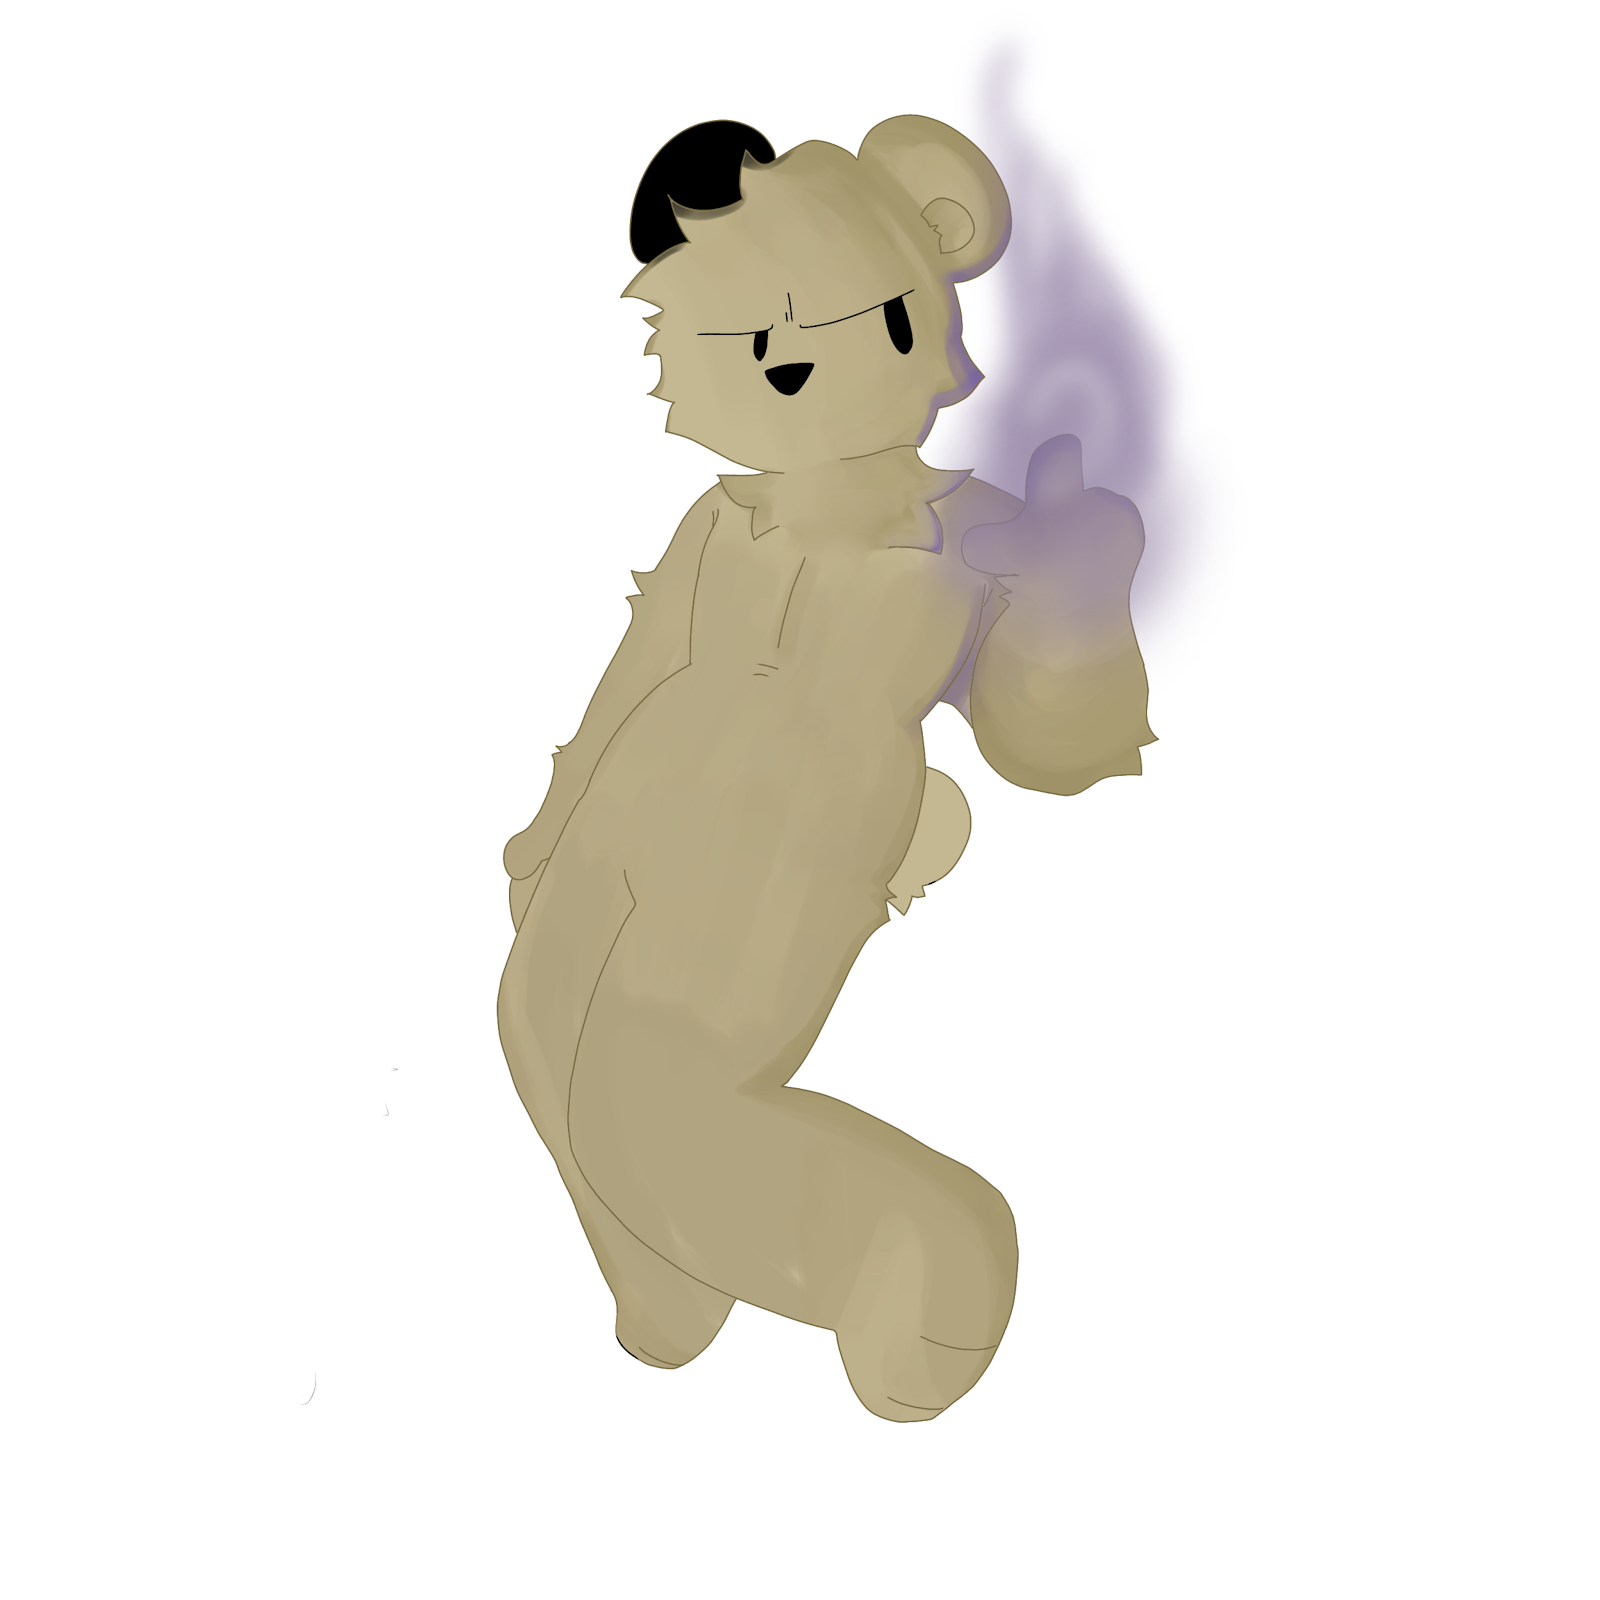 this is Sam, from a Roblox game: Bear alpha -) by Panbel on DeviantArt